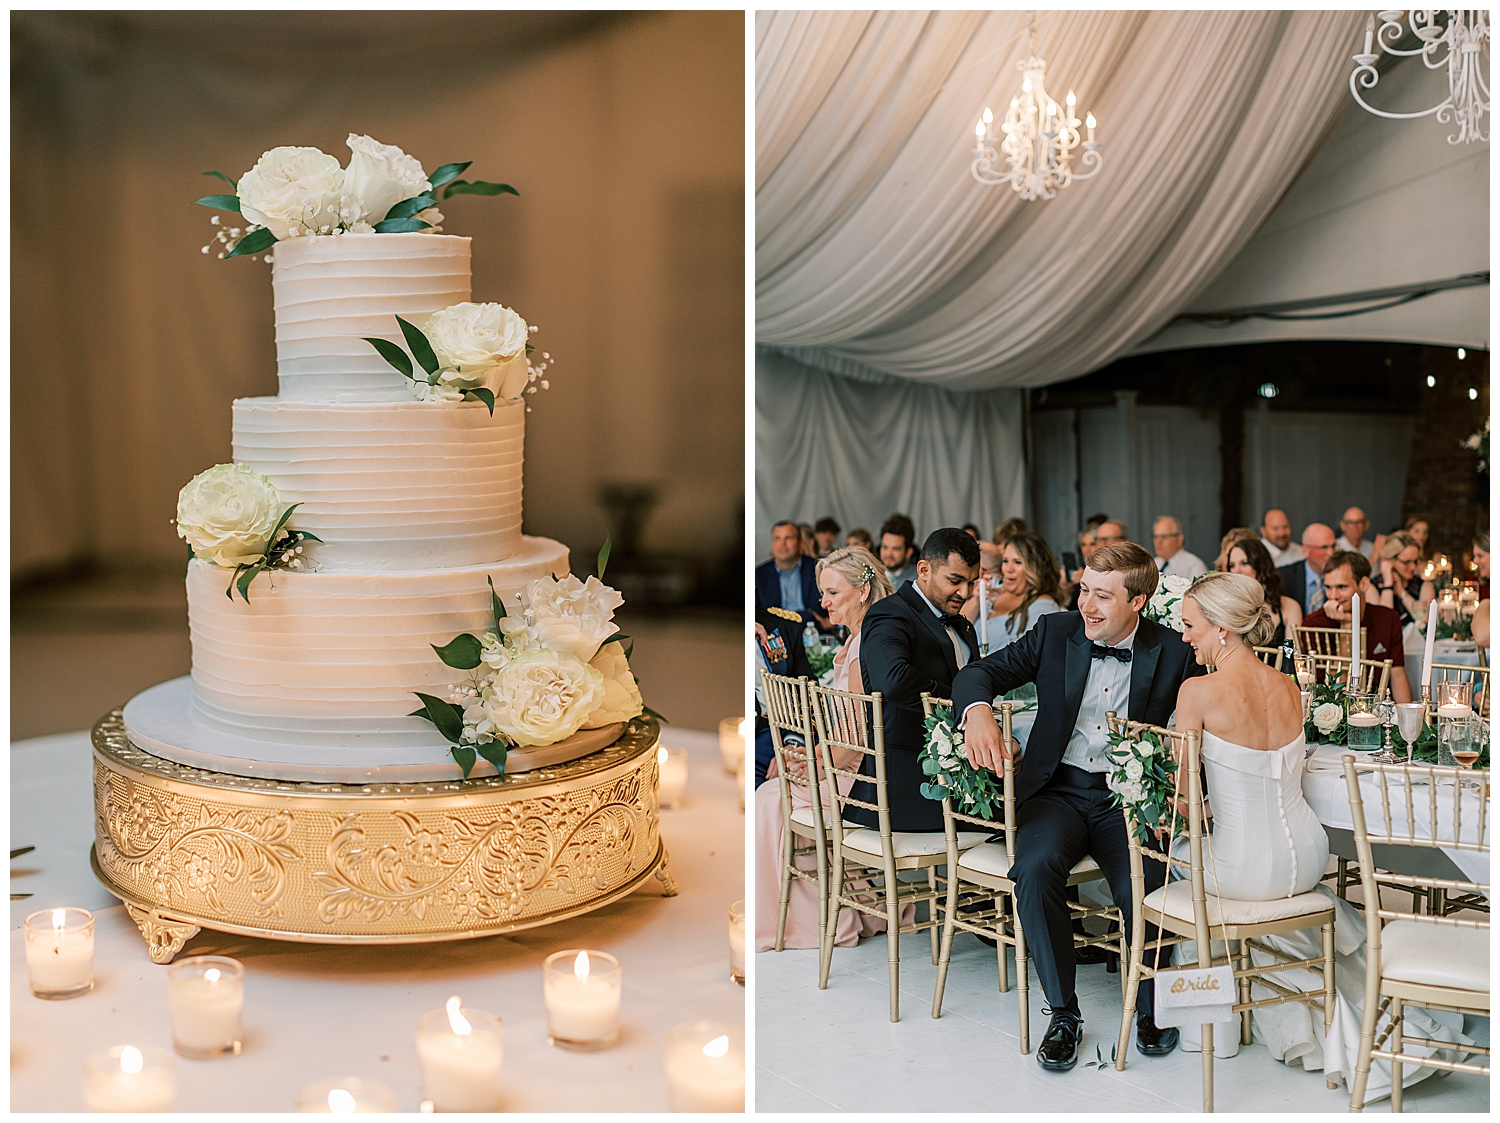 A wedding cake sits on a gold cake stand.